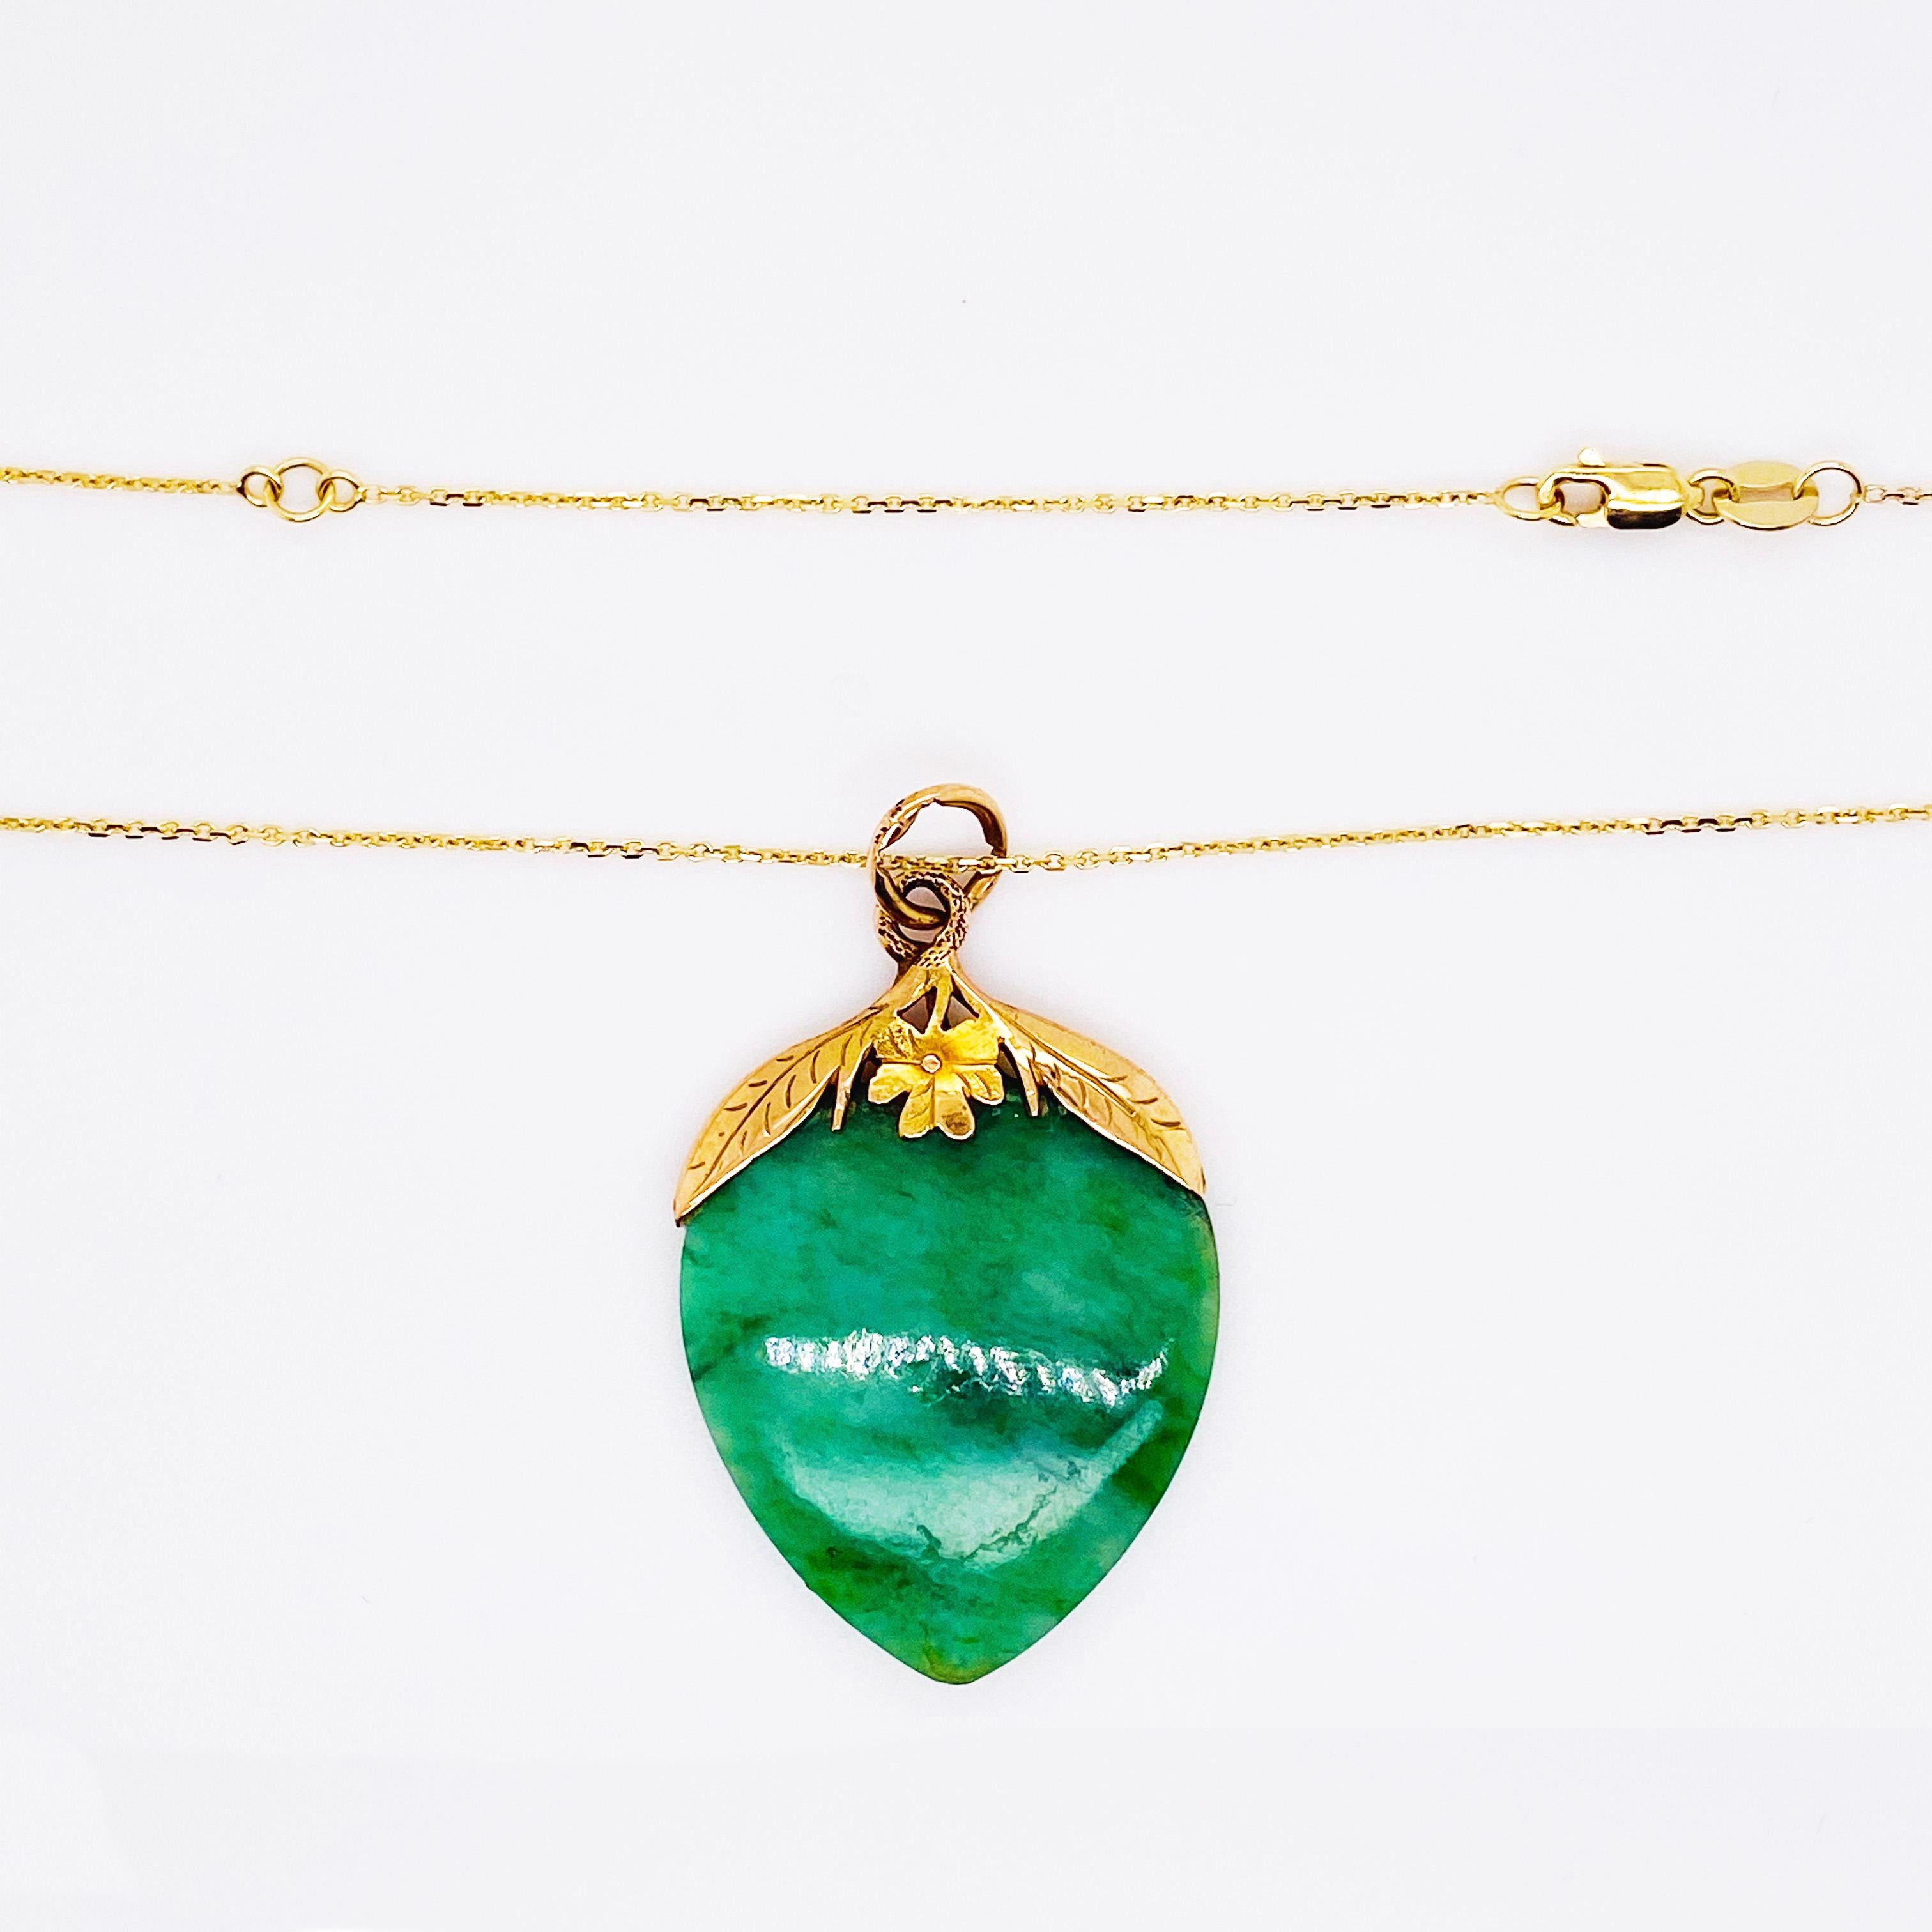 Protection for yourself! This is an awesome antique, rare leaf, petal jadeite jade pendant! The jade is a very vibrant, deep jade with a vibrant natural green color that very striking. Leafs and petals are known to give good luck when worn and jade